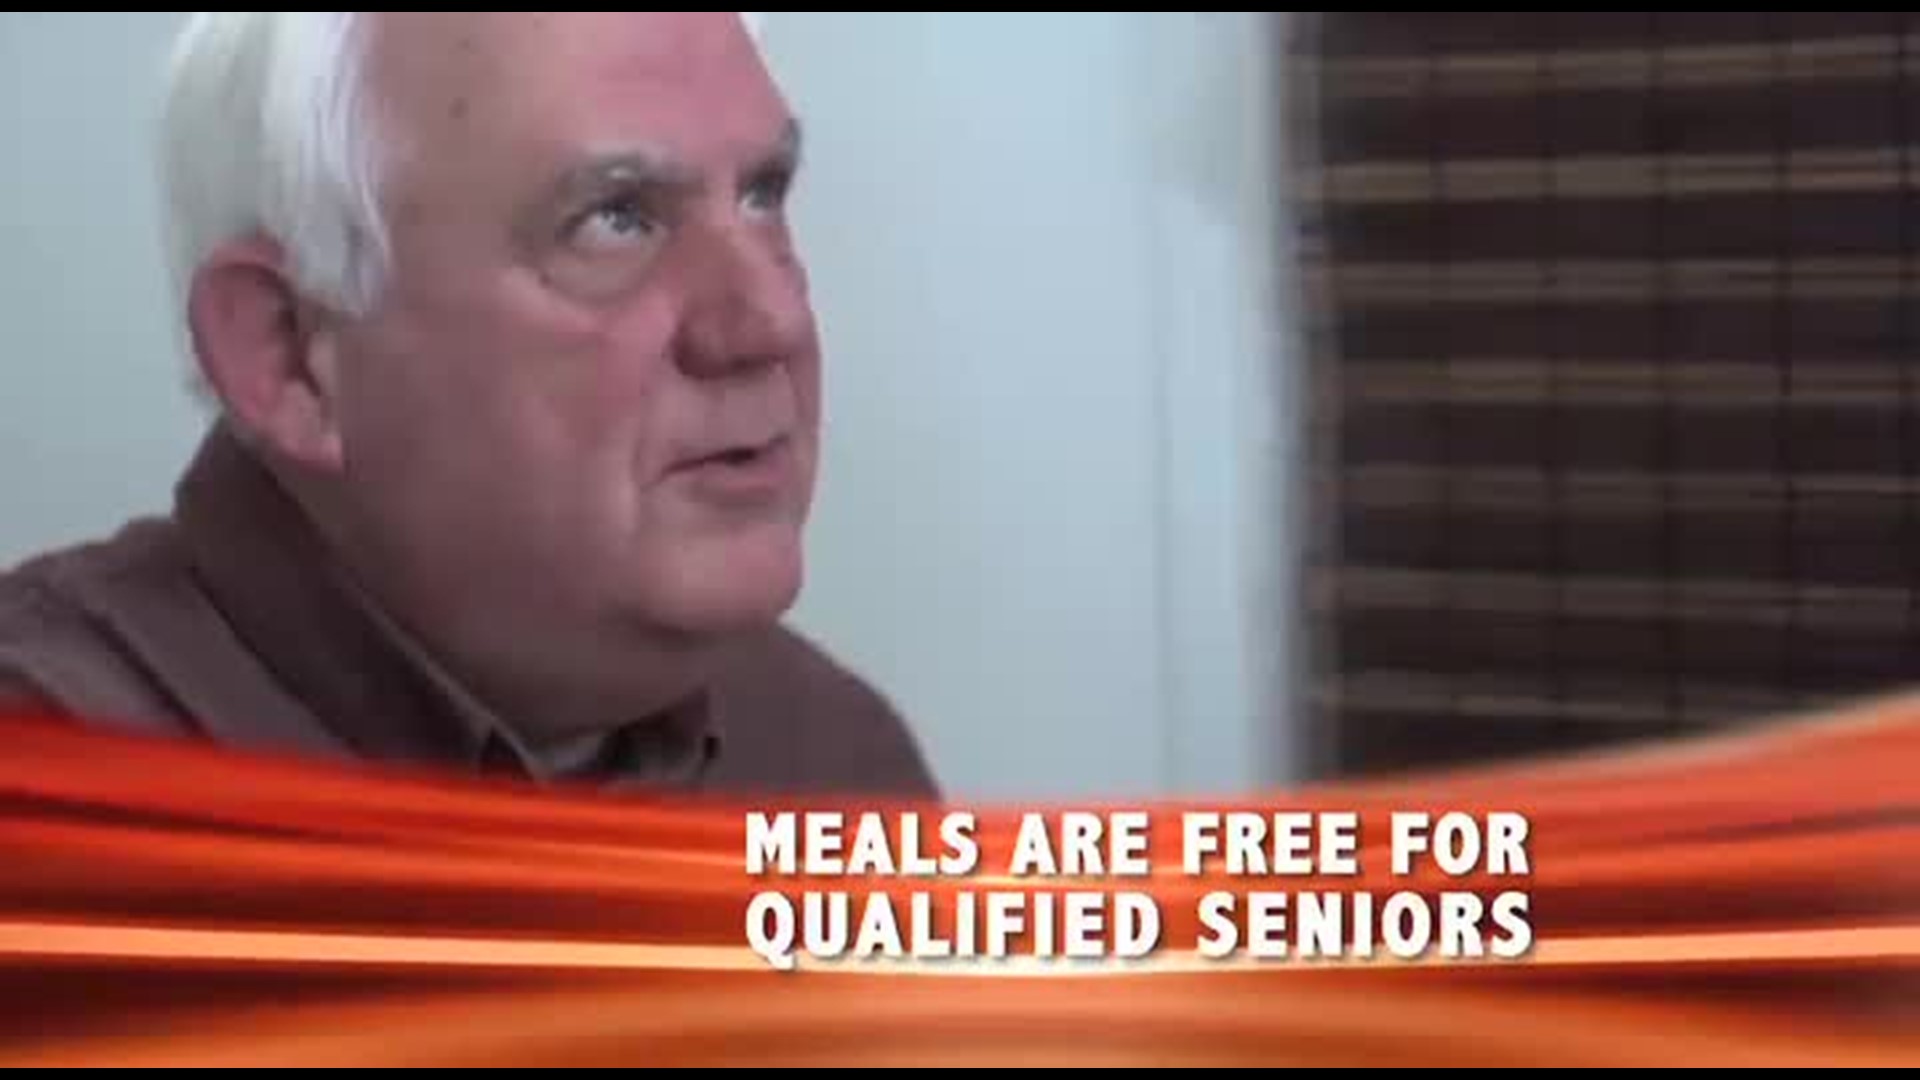 Art of Aging - Free Meals